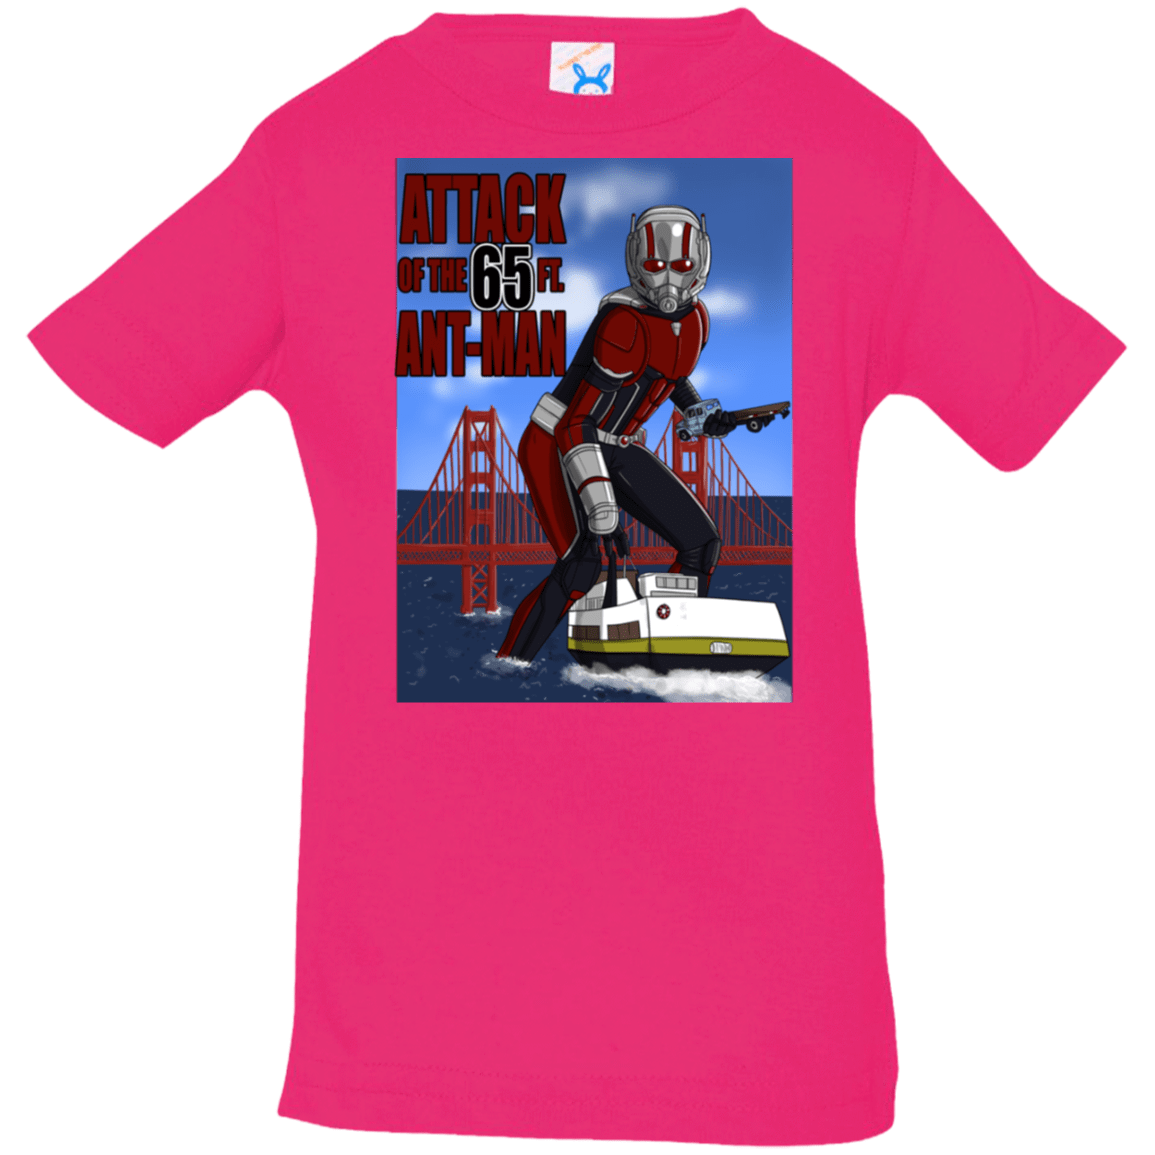 T-Shirts Hot Pink / 6 Months Attack of the 65 ft. Ant-Man Infant Premium T-Shirt